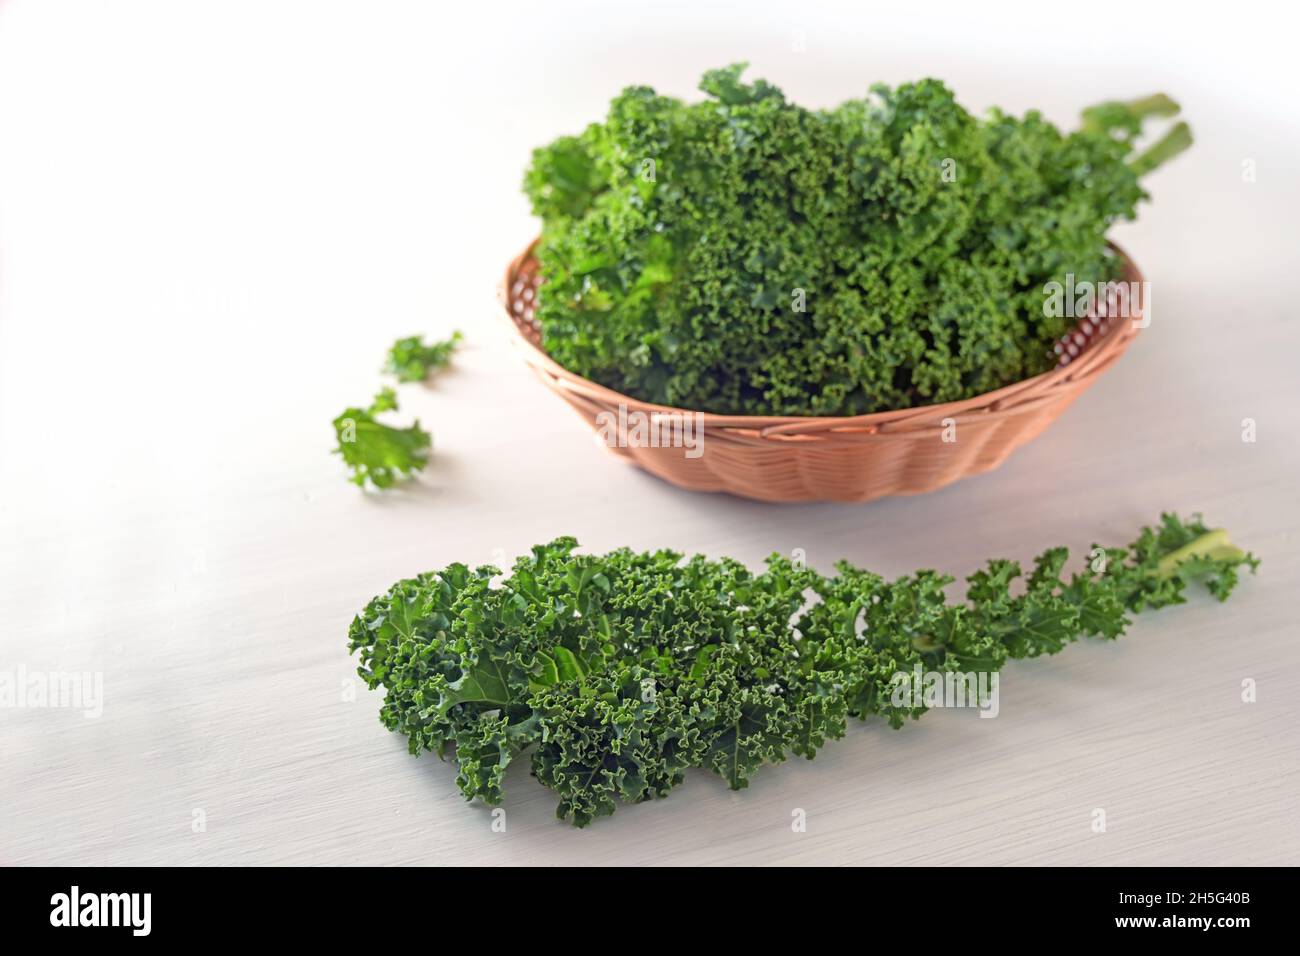 Kale or green leaf cabbage, one curly leaf and more collected in a basket on a white table, winter vegetable rich in vitamins, copy space, selected fo Stock Photo